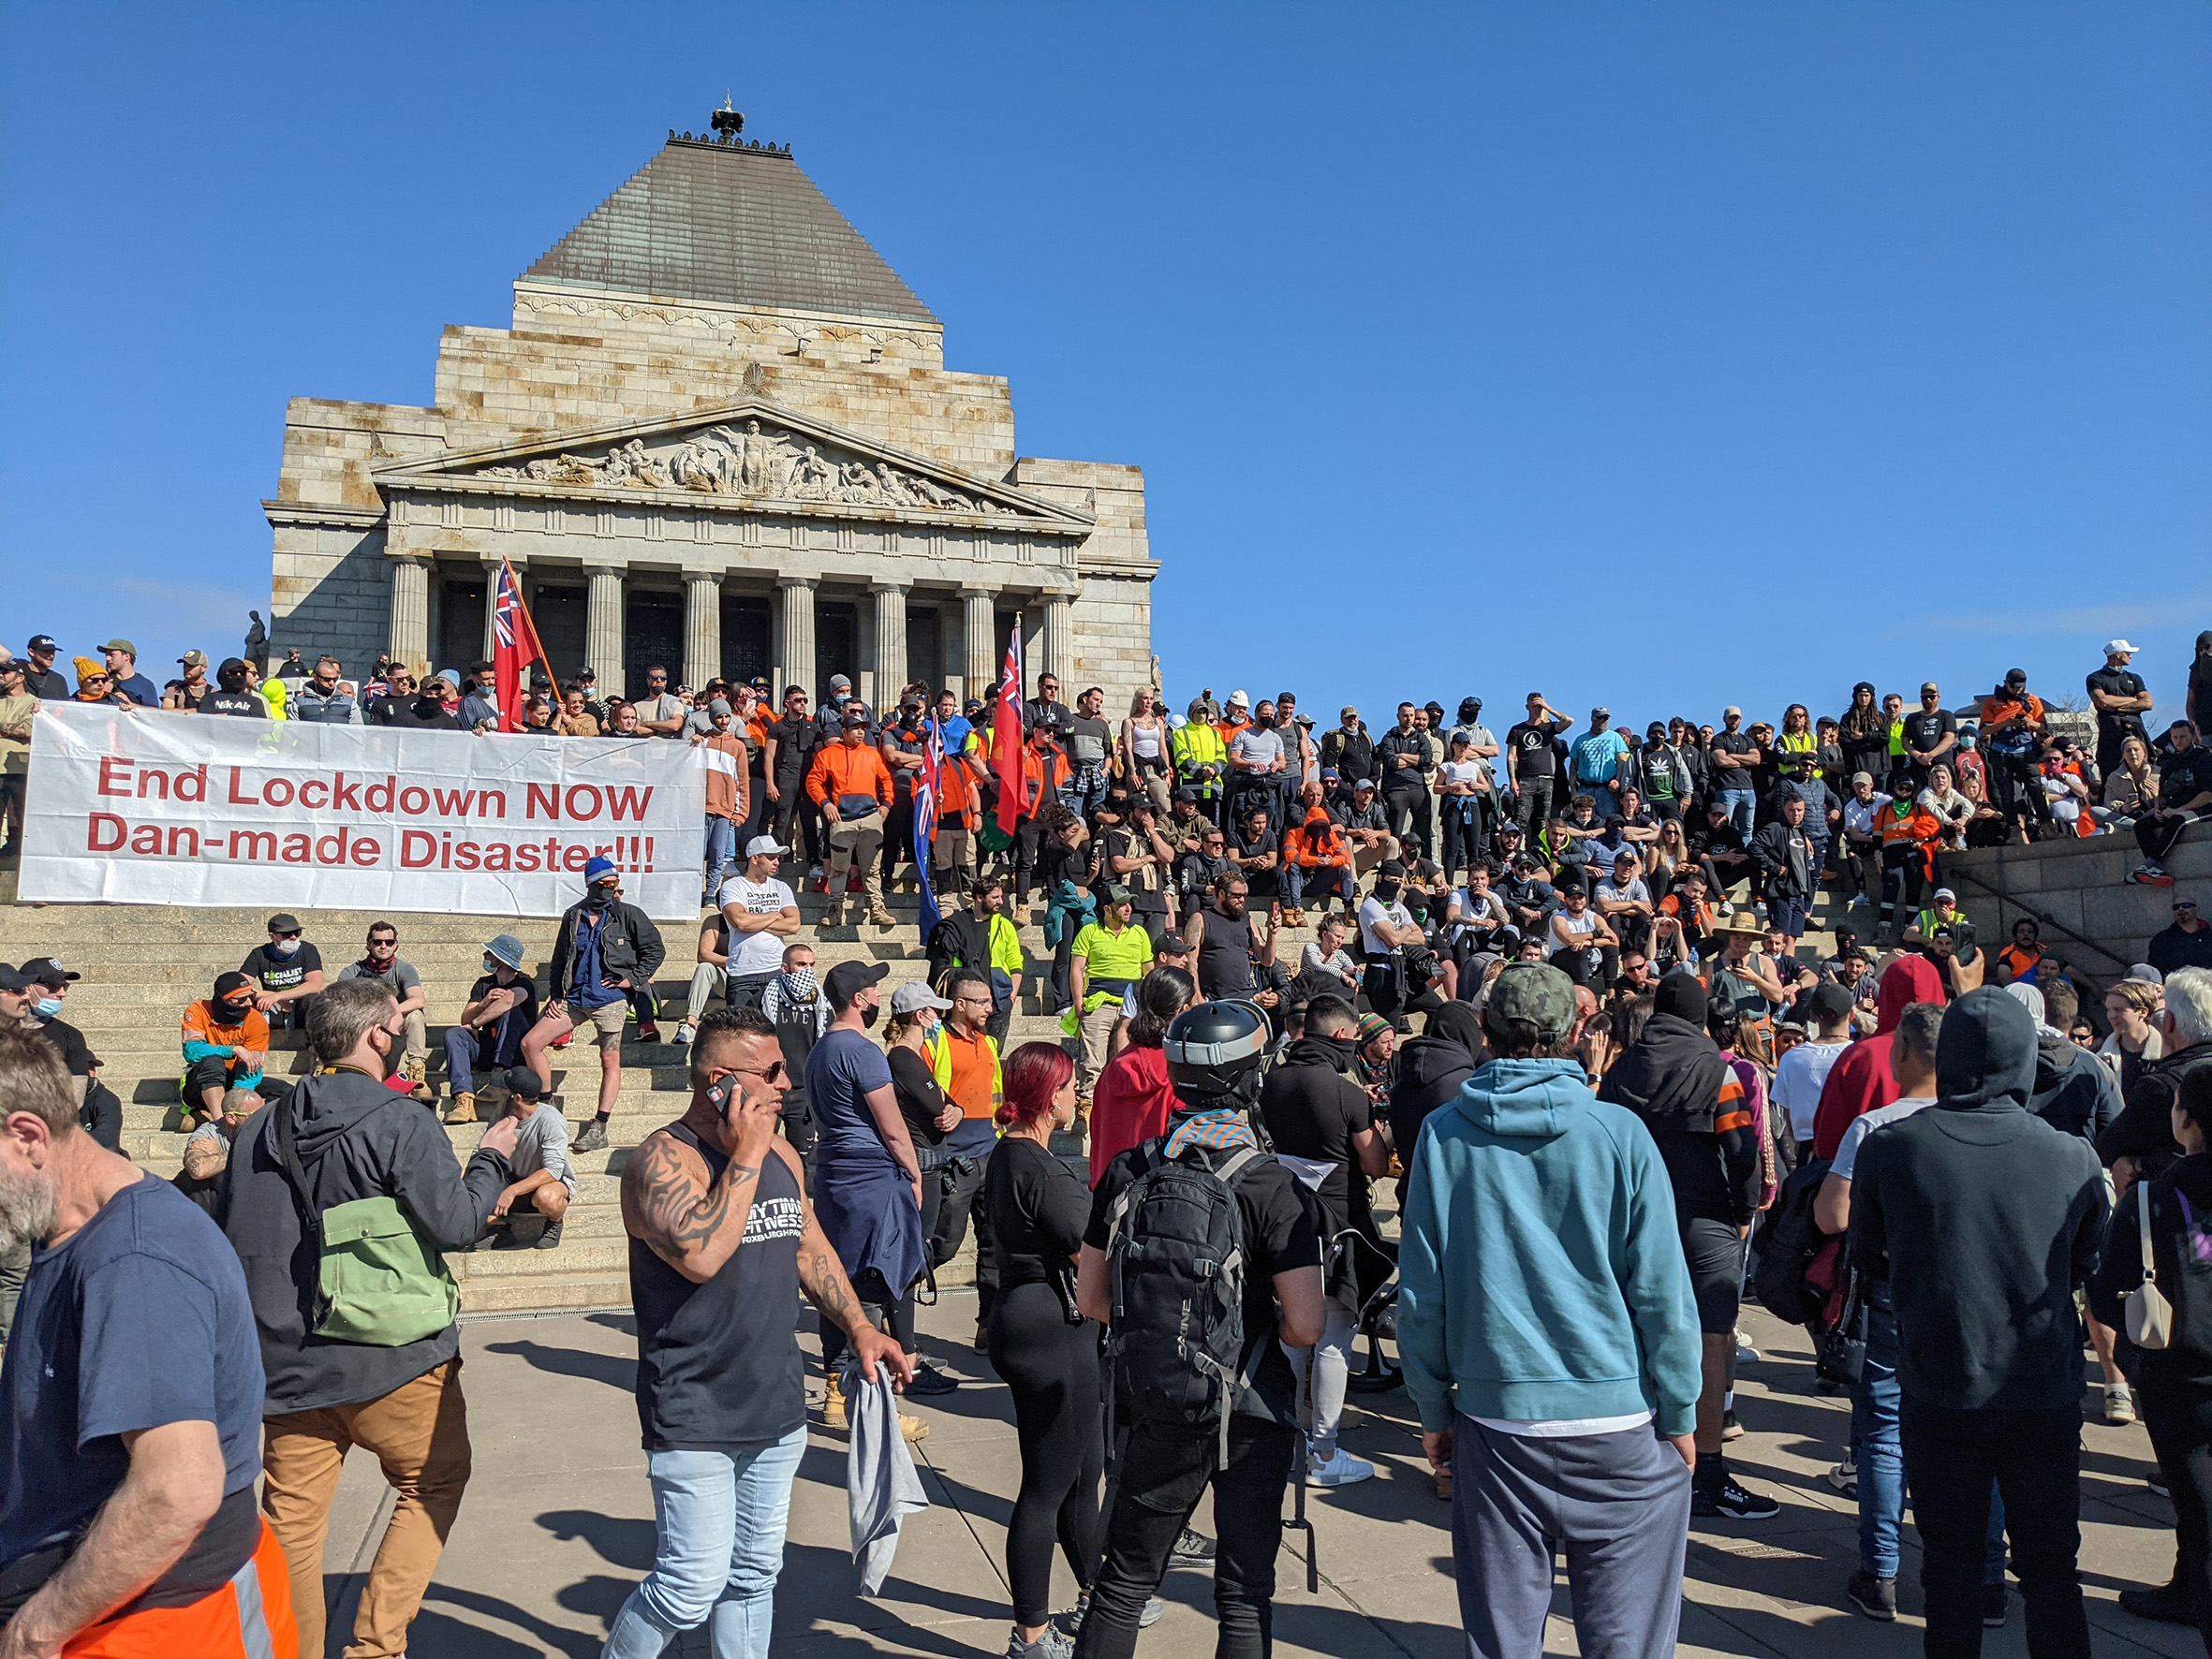 The protesters occupy the Shrine of Remembrance 